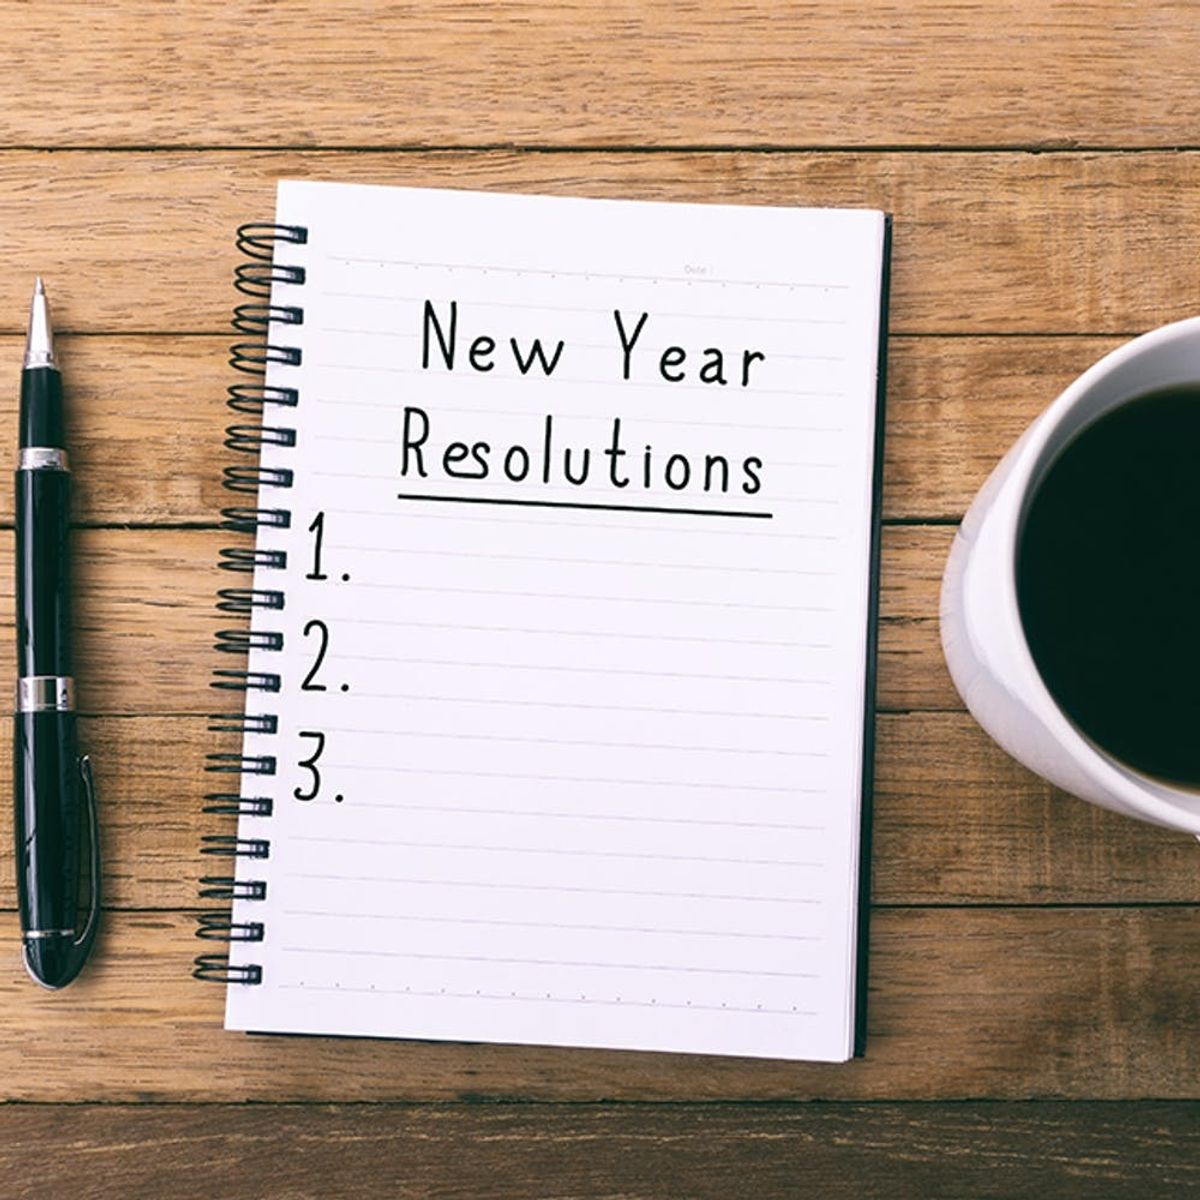 11 Things You Should Resolve to Do Less Of in the New Year